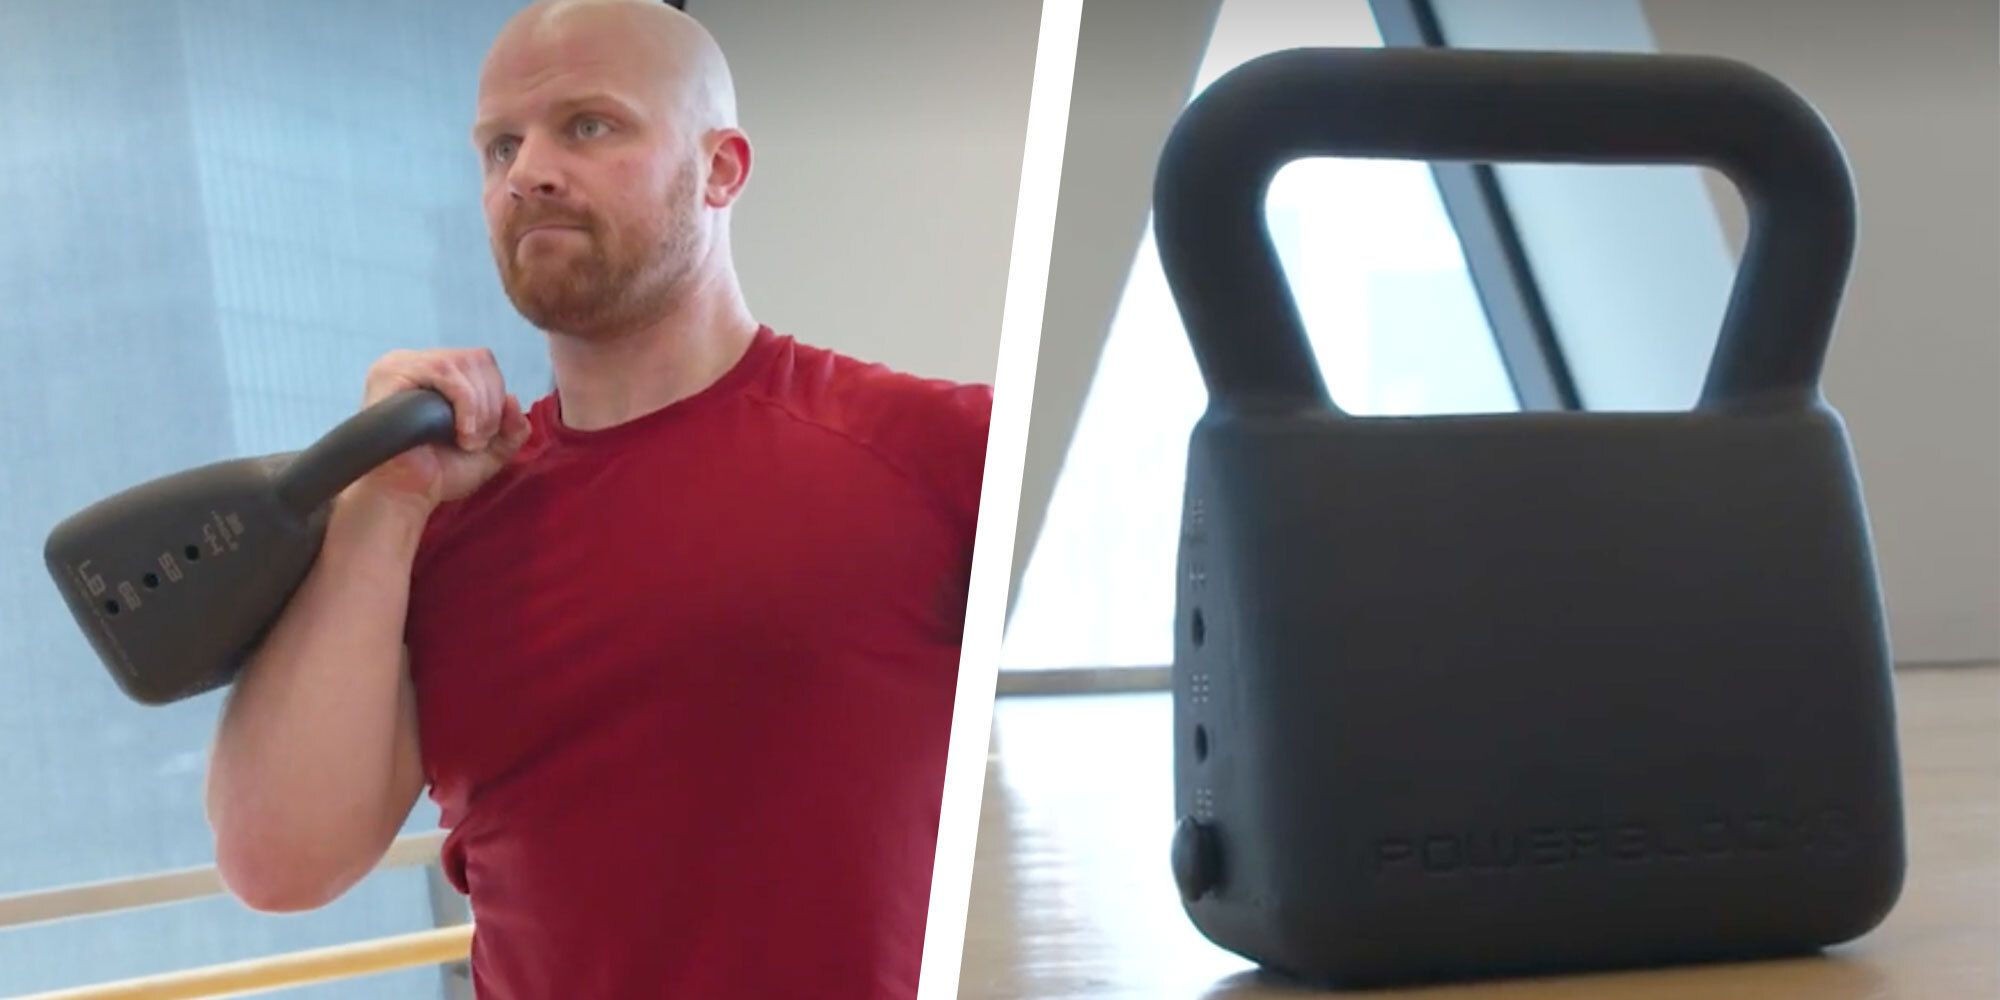 Trainer's PowerBlock Adjustable Kettlebell Gear Test and Review